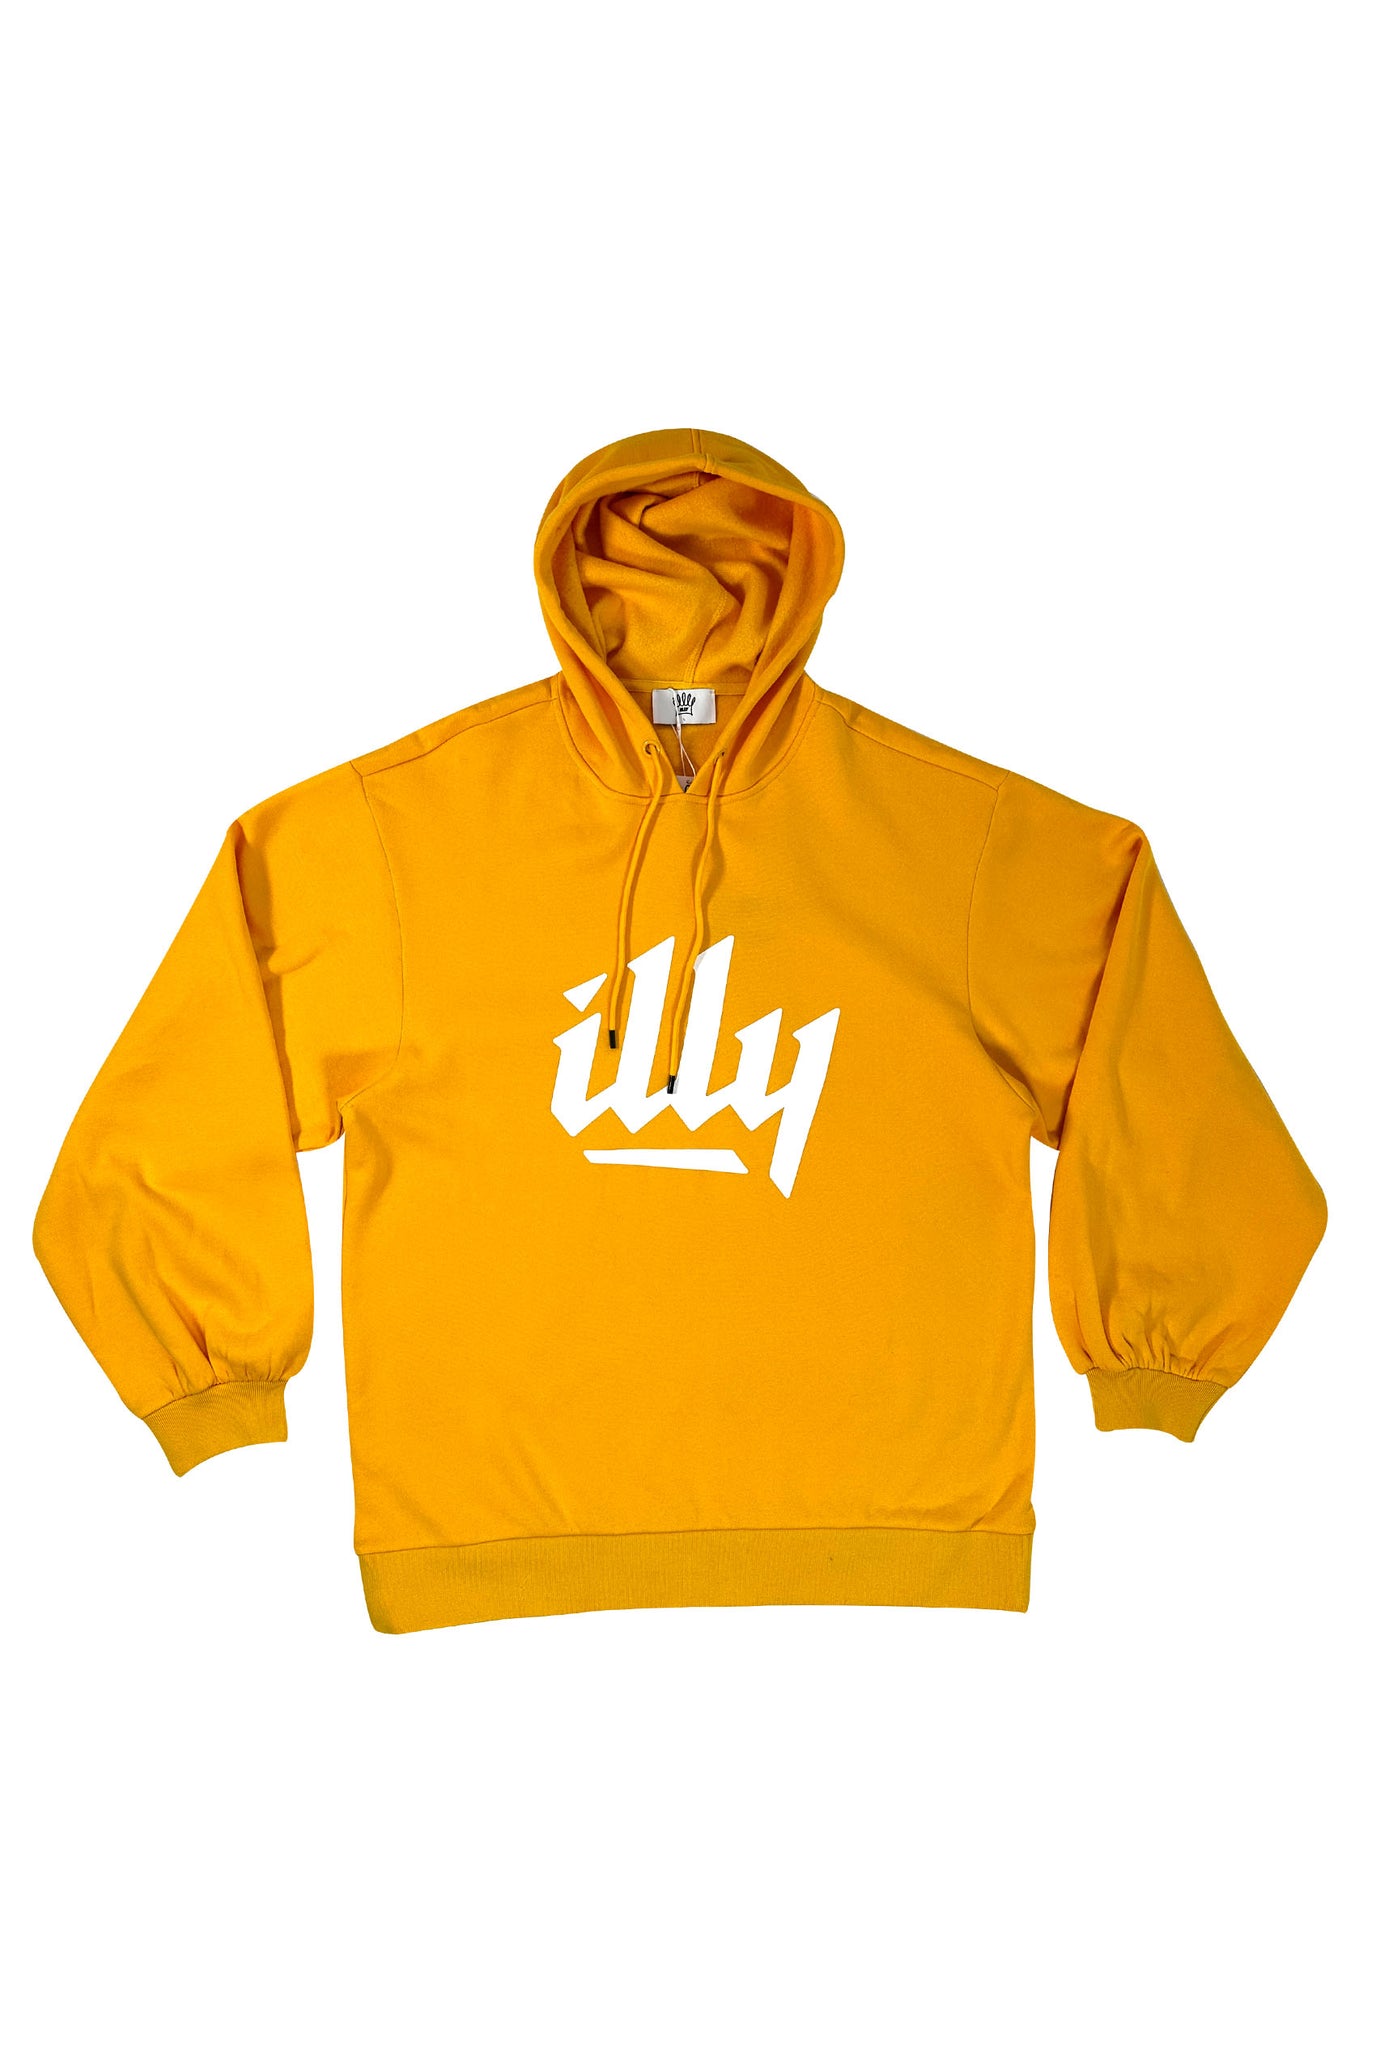 ILLY HOODIE IN SUNFLOWER